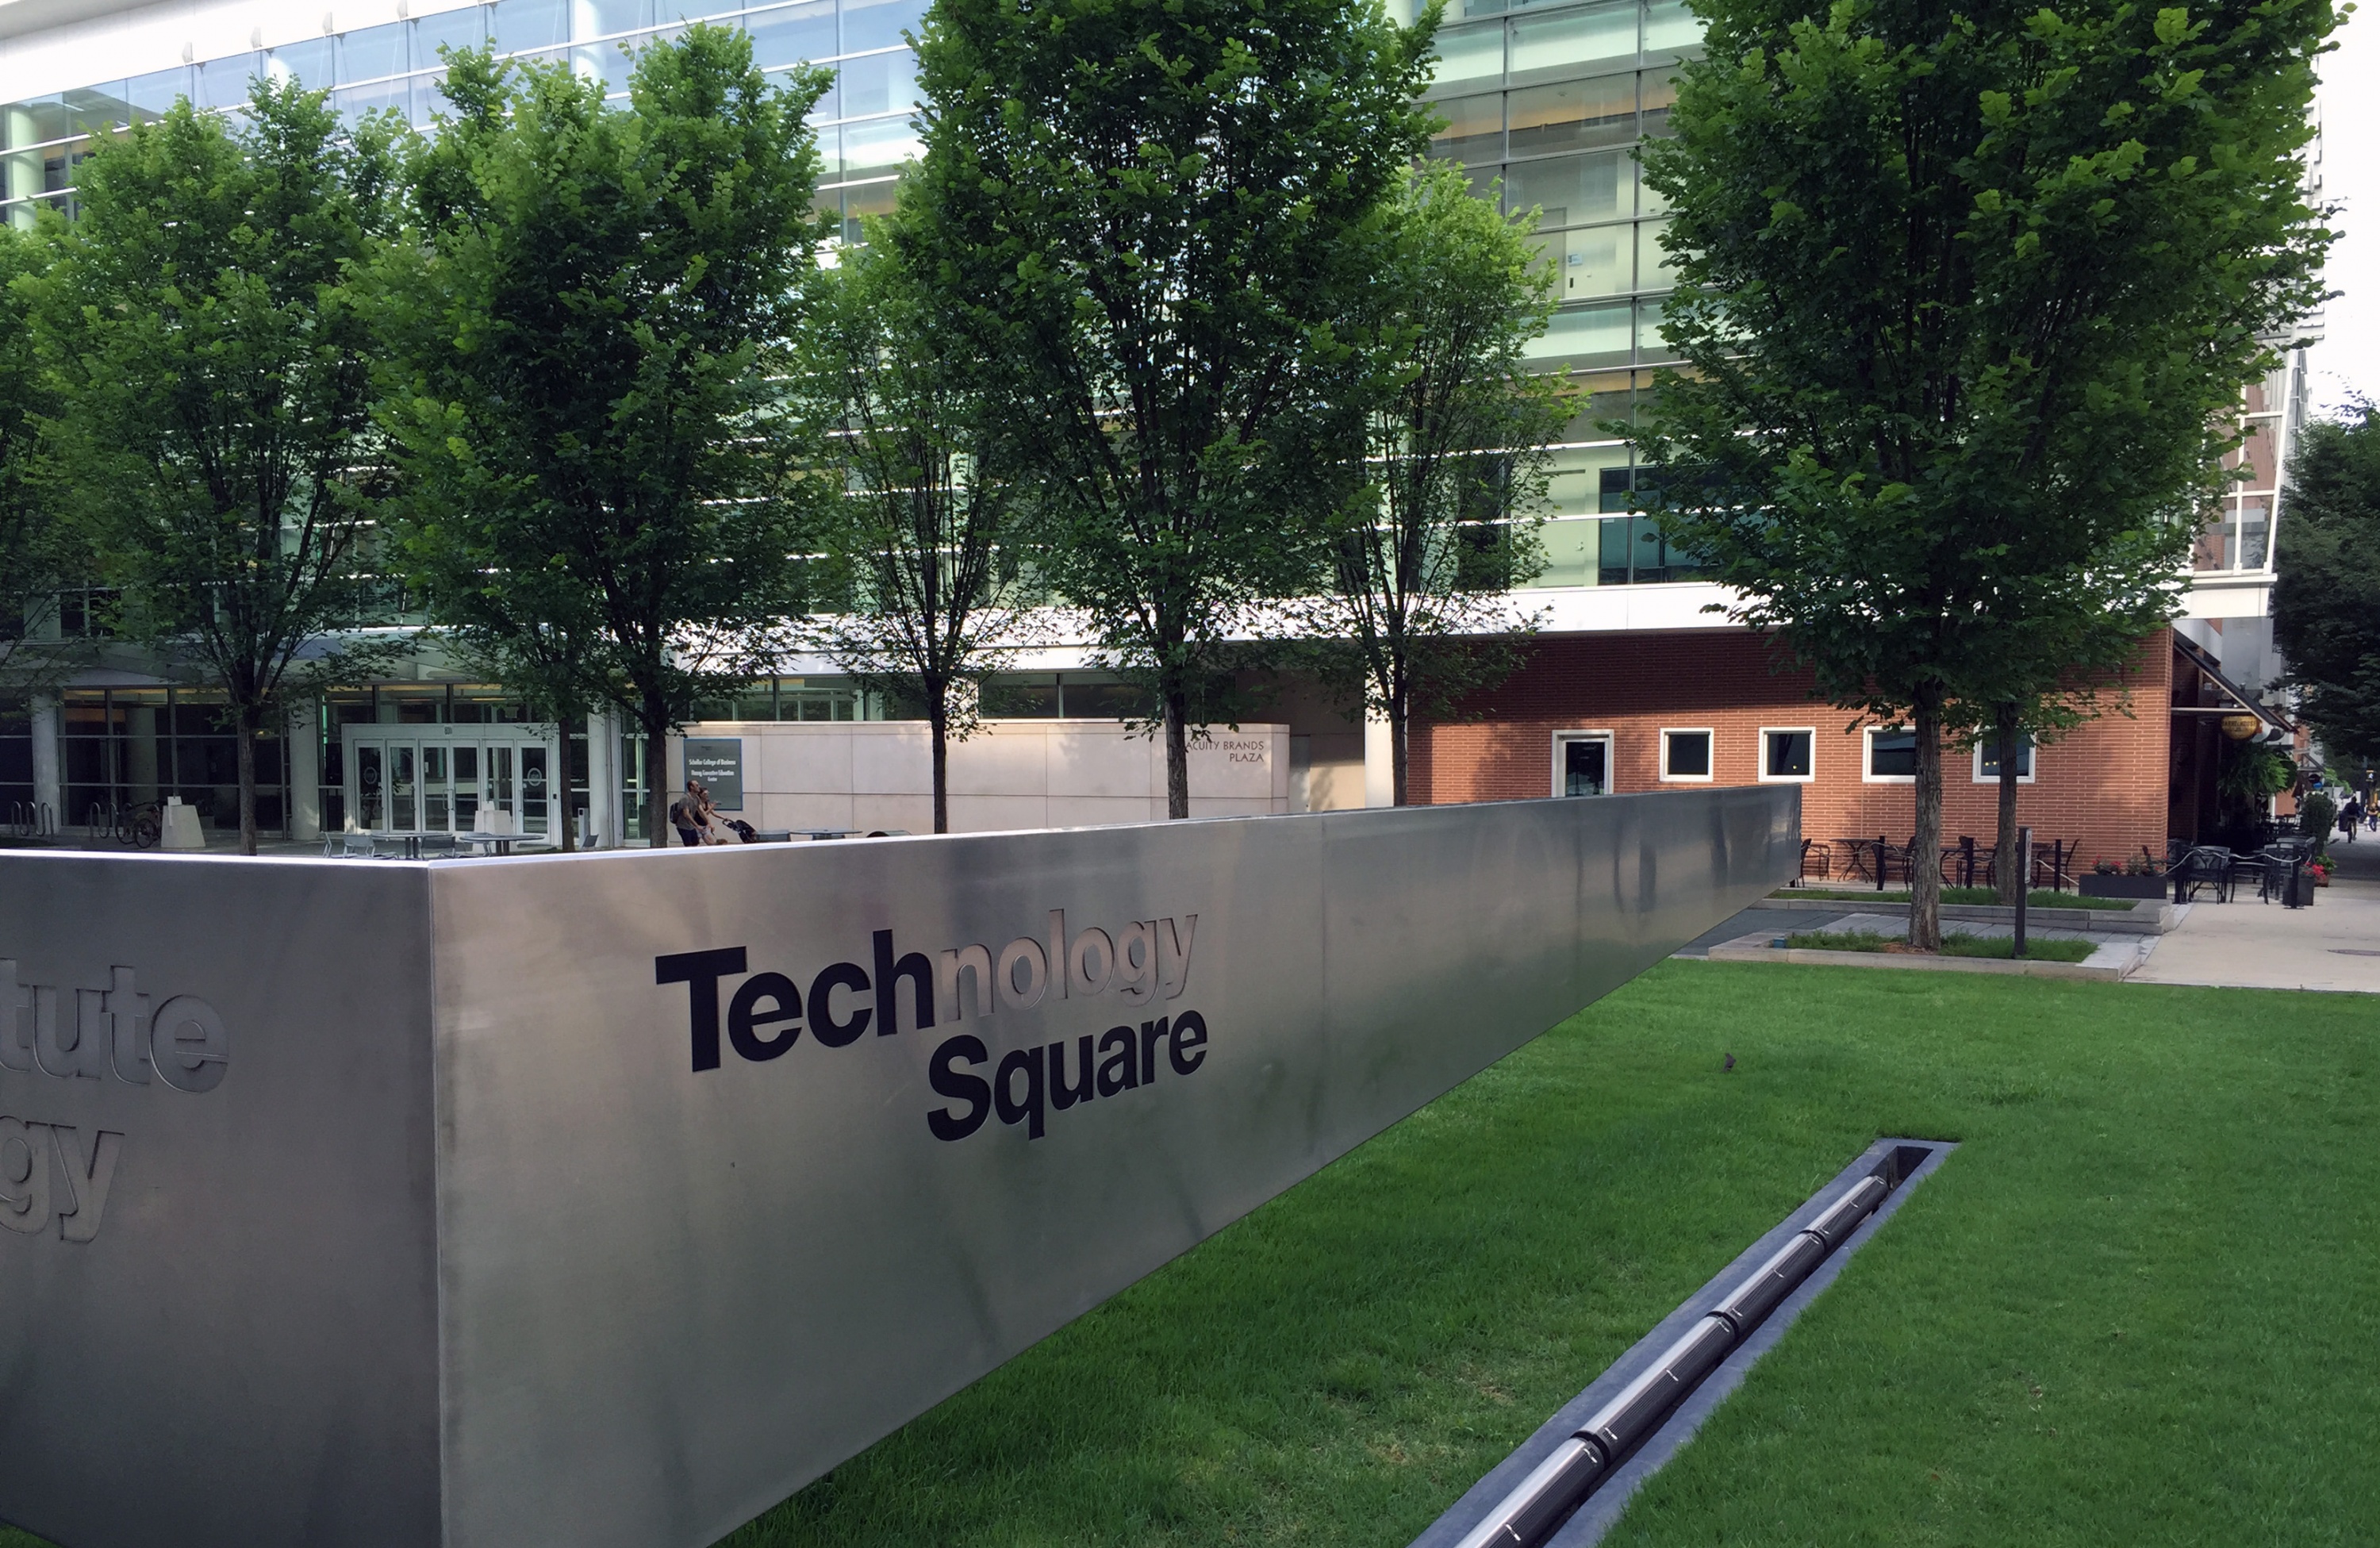 Georgia Tech's Tech Square will be home to a new accelerator and venture fund called Engage.